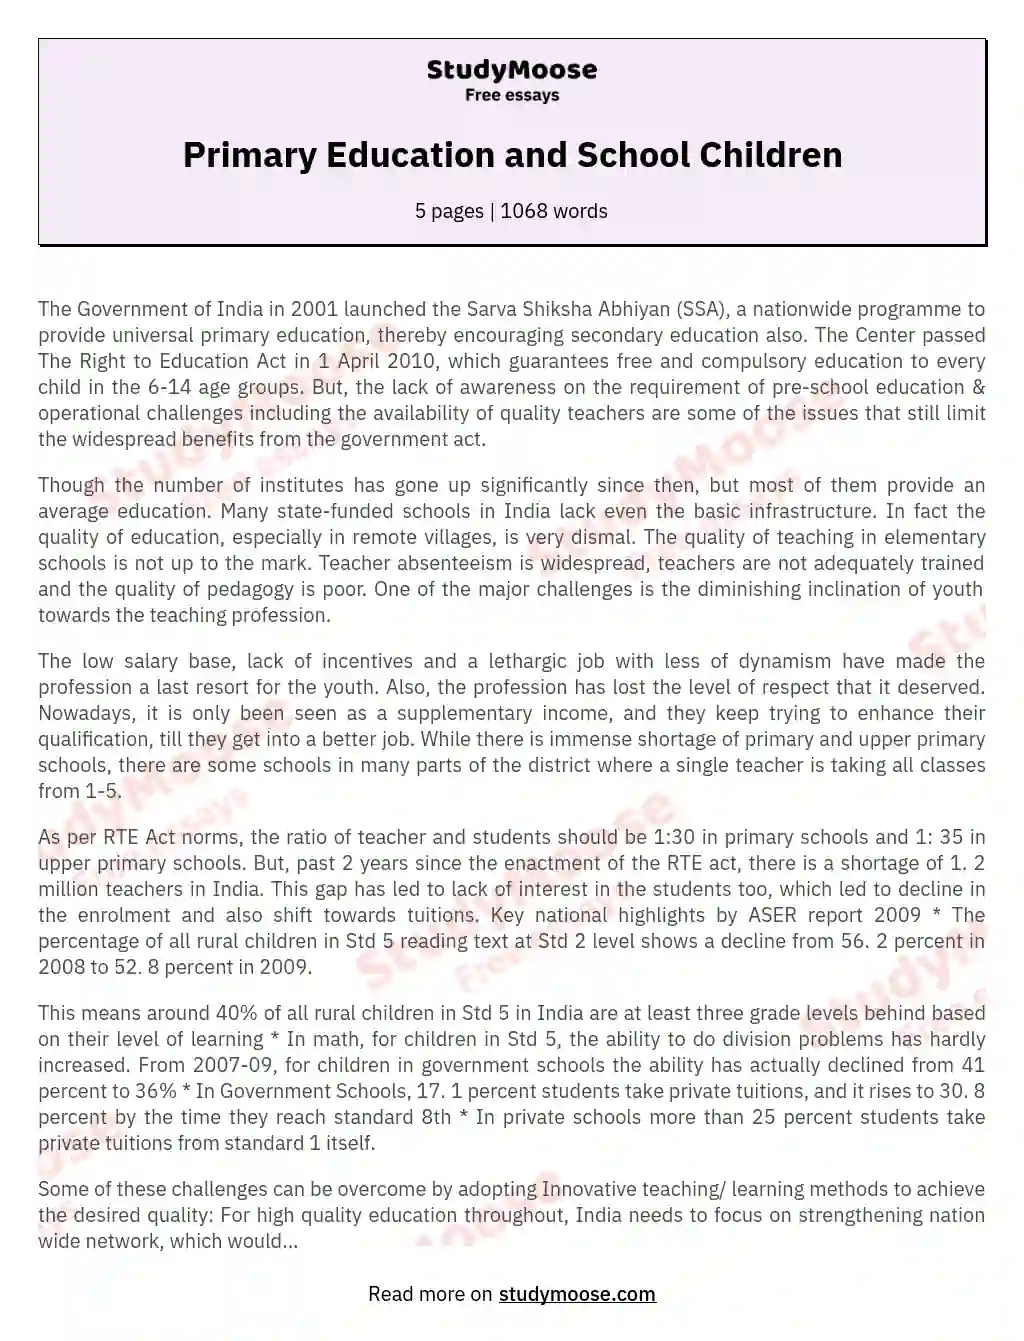 Primary Education and School Children